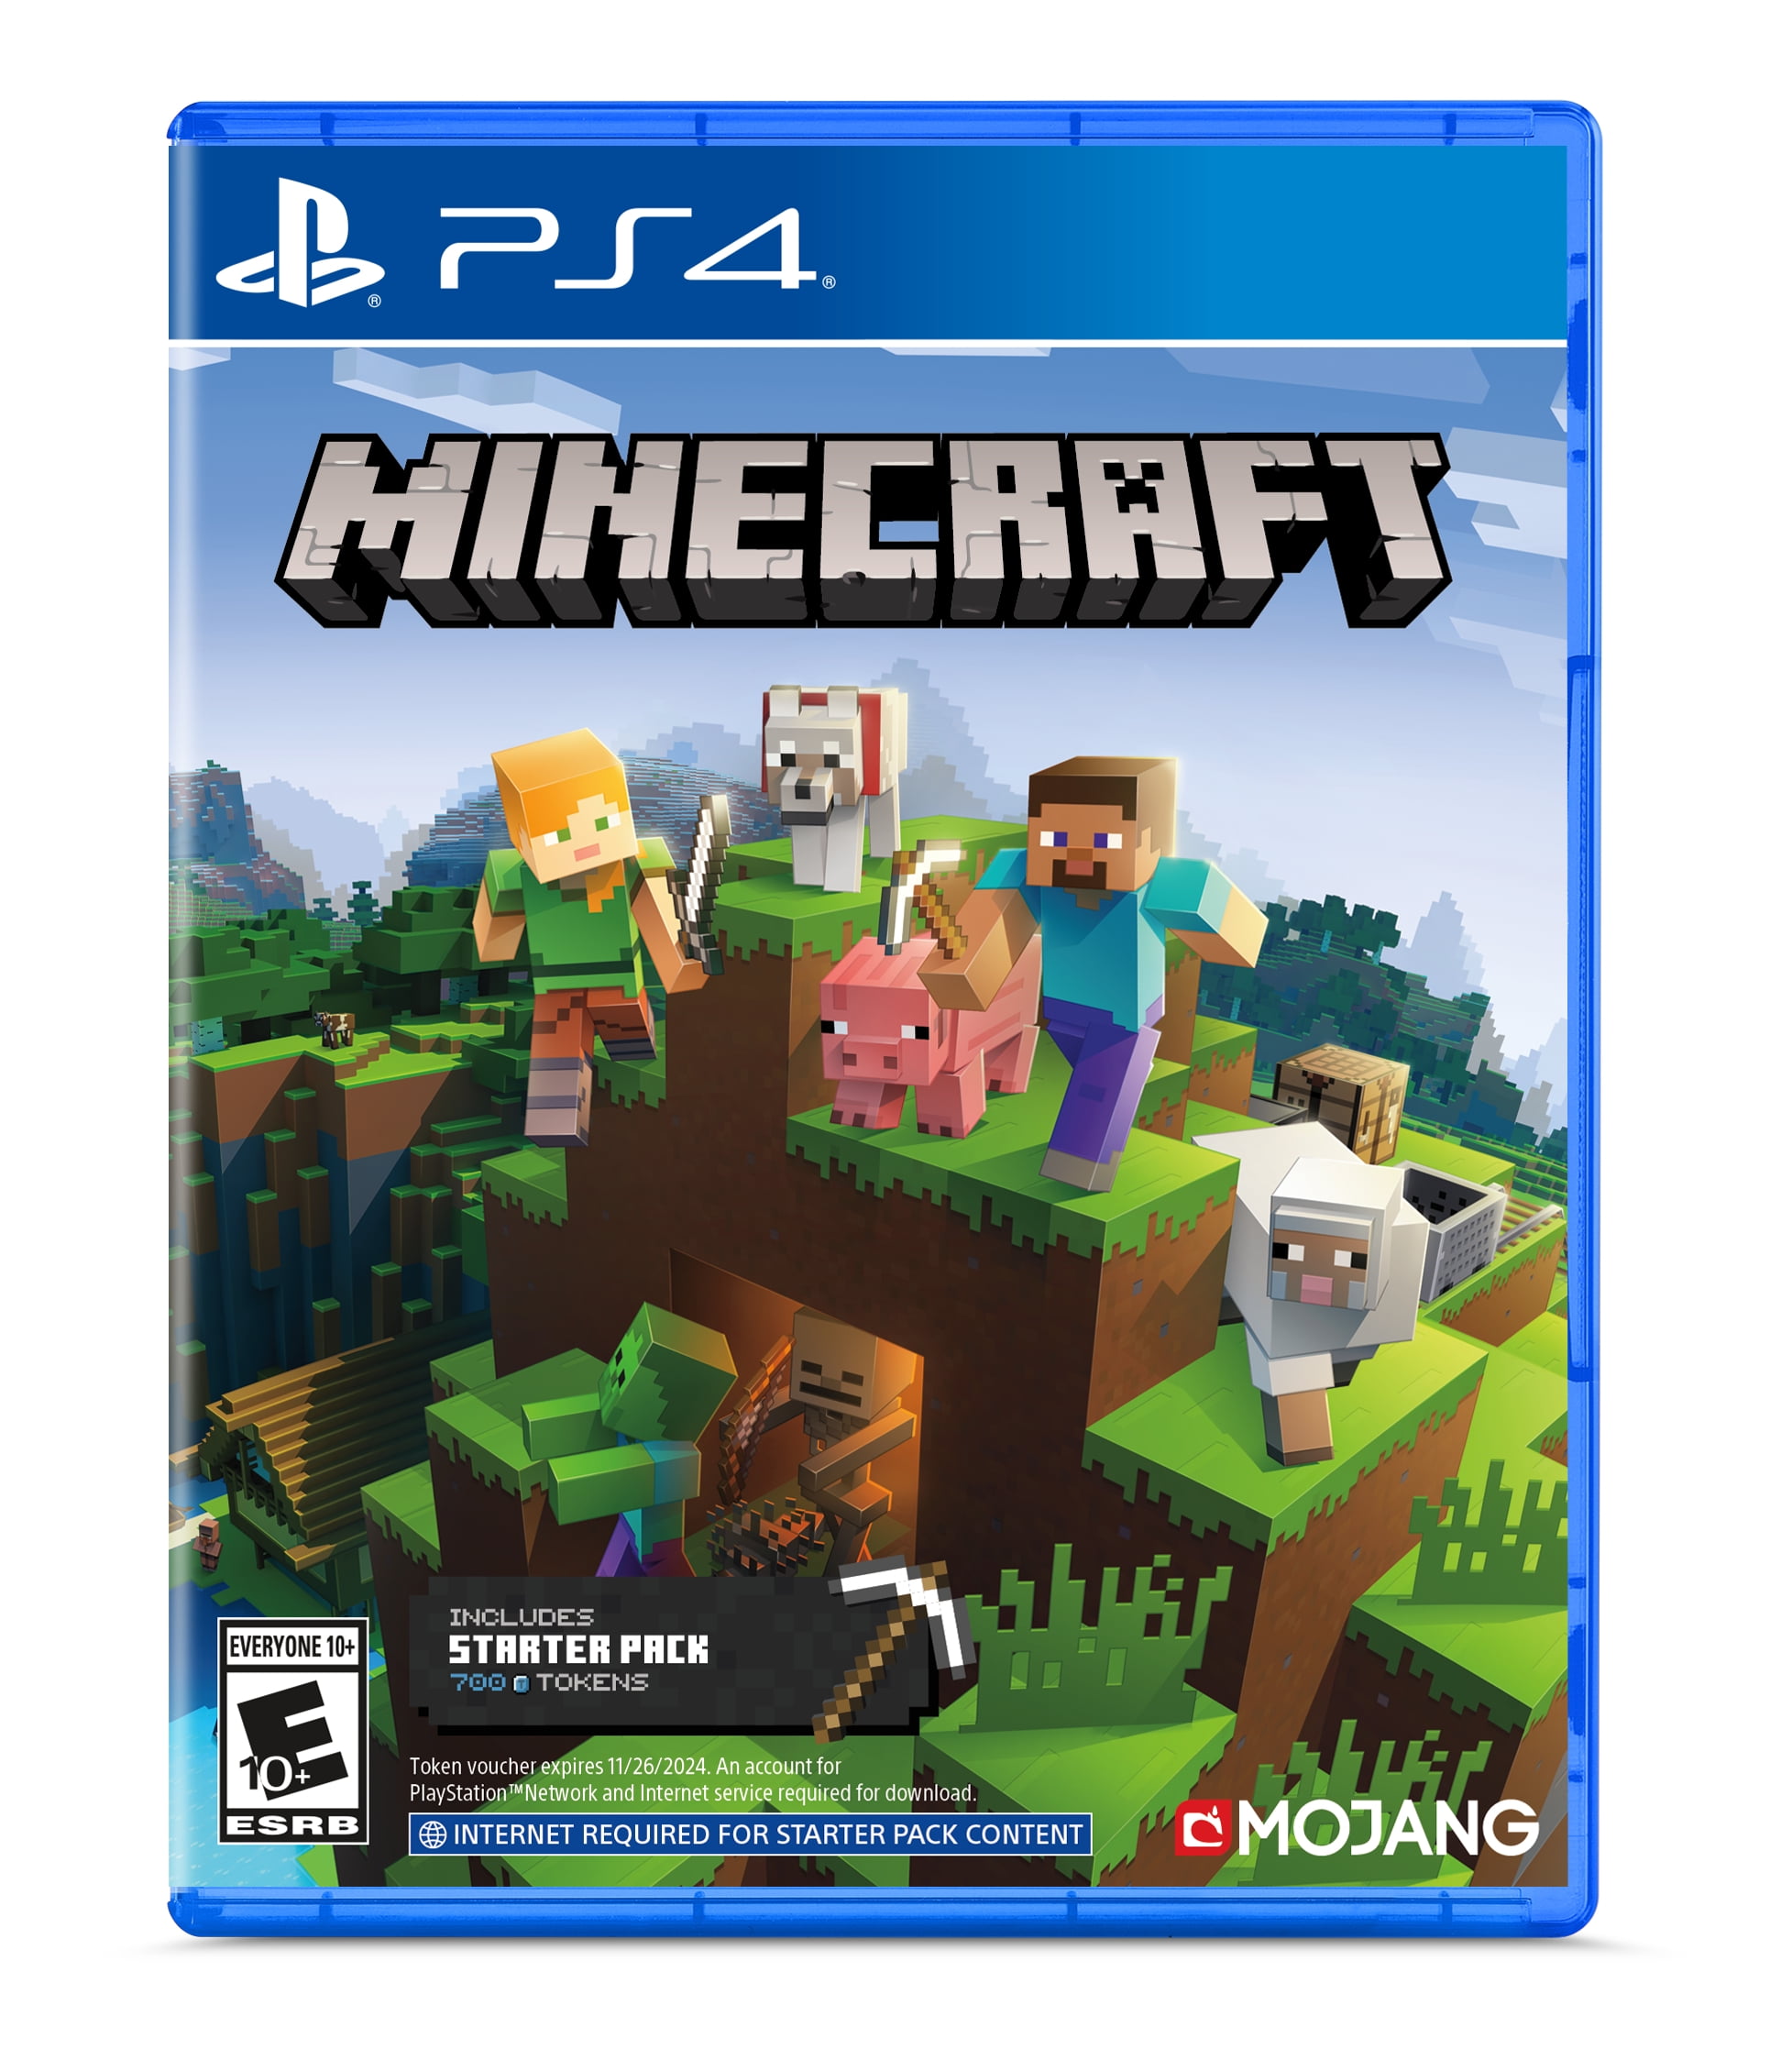 Minecraft: PlayStation 4 Edition Sony PlayStation 4 Video Game PS4